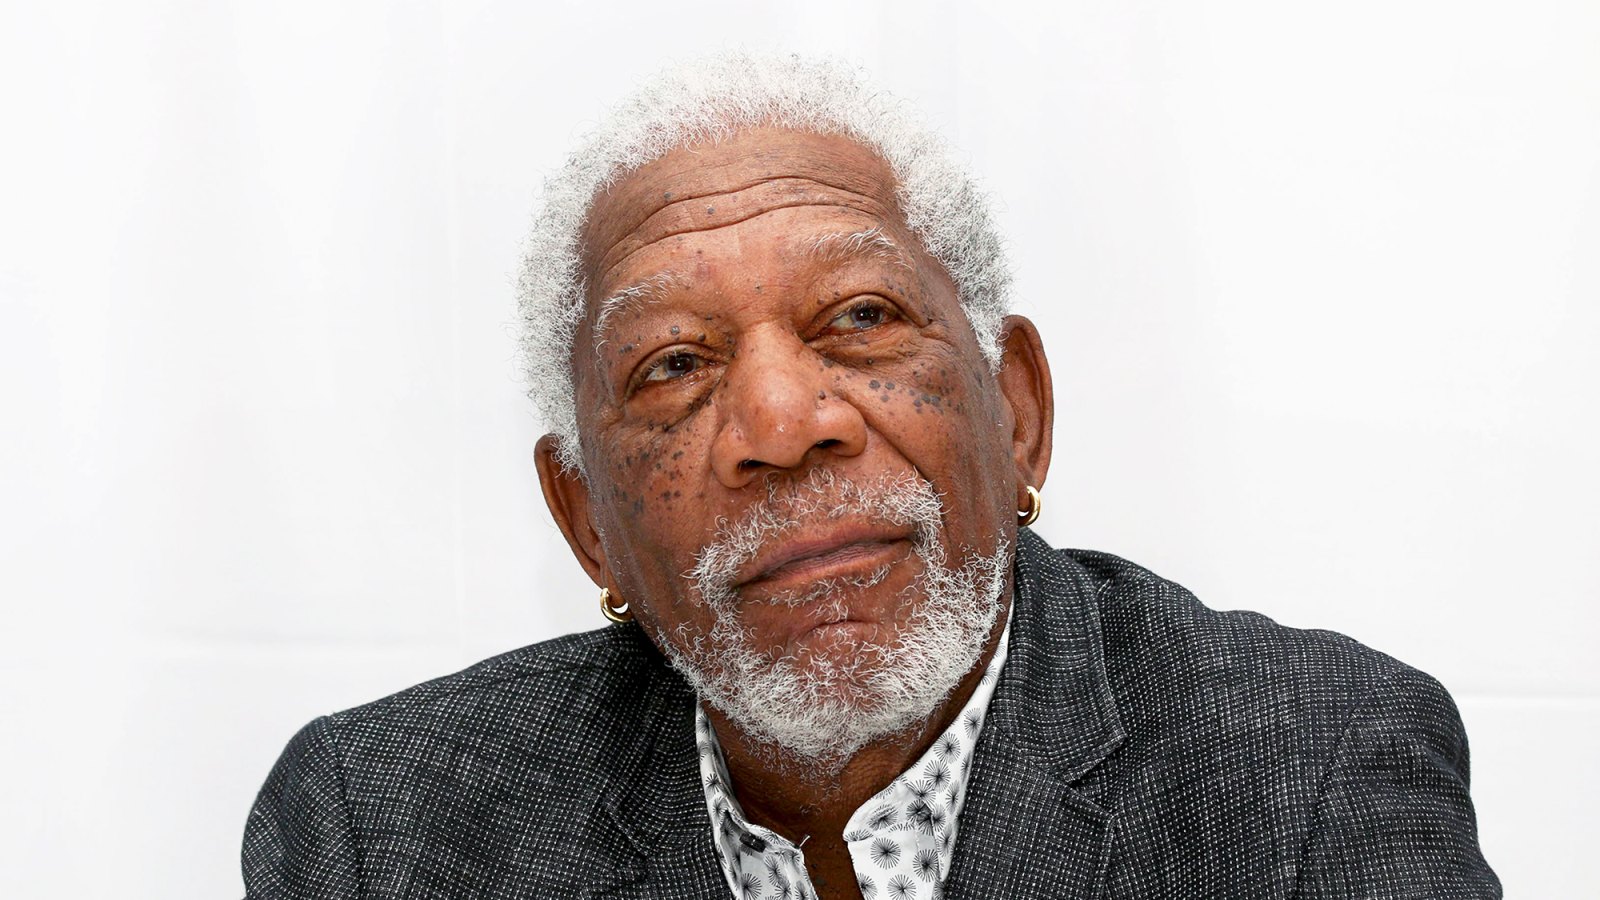 Morgan Freeman attends the 'Going in Style' 2017 Press Conference at the Whitby Hotel in New York City.